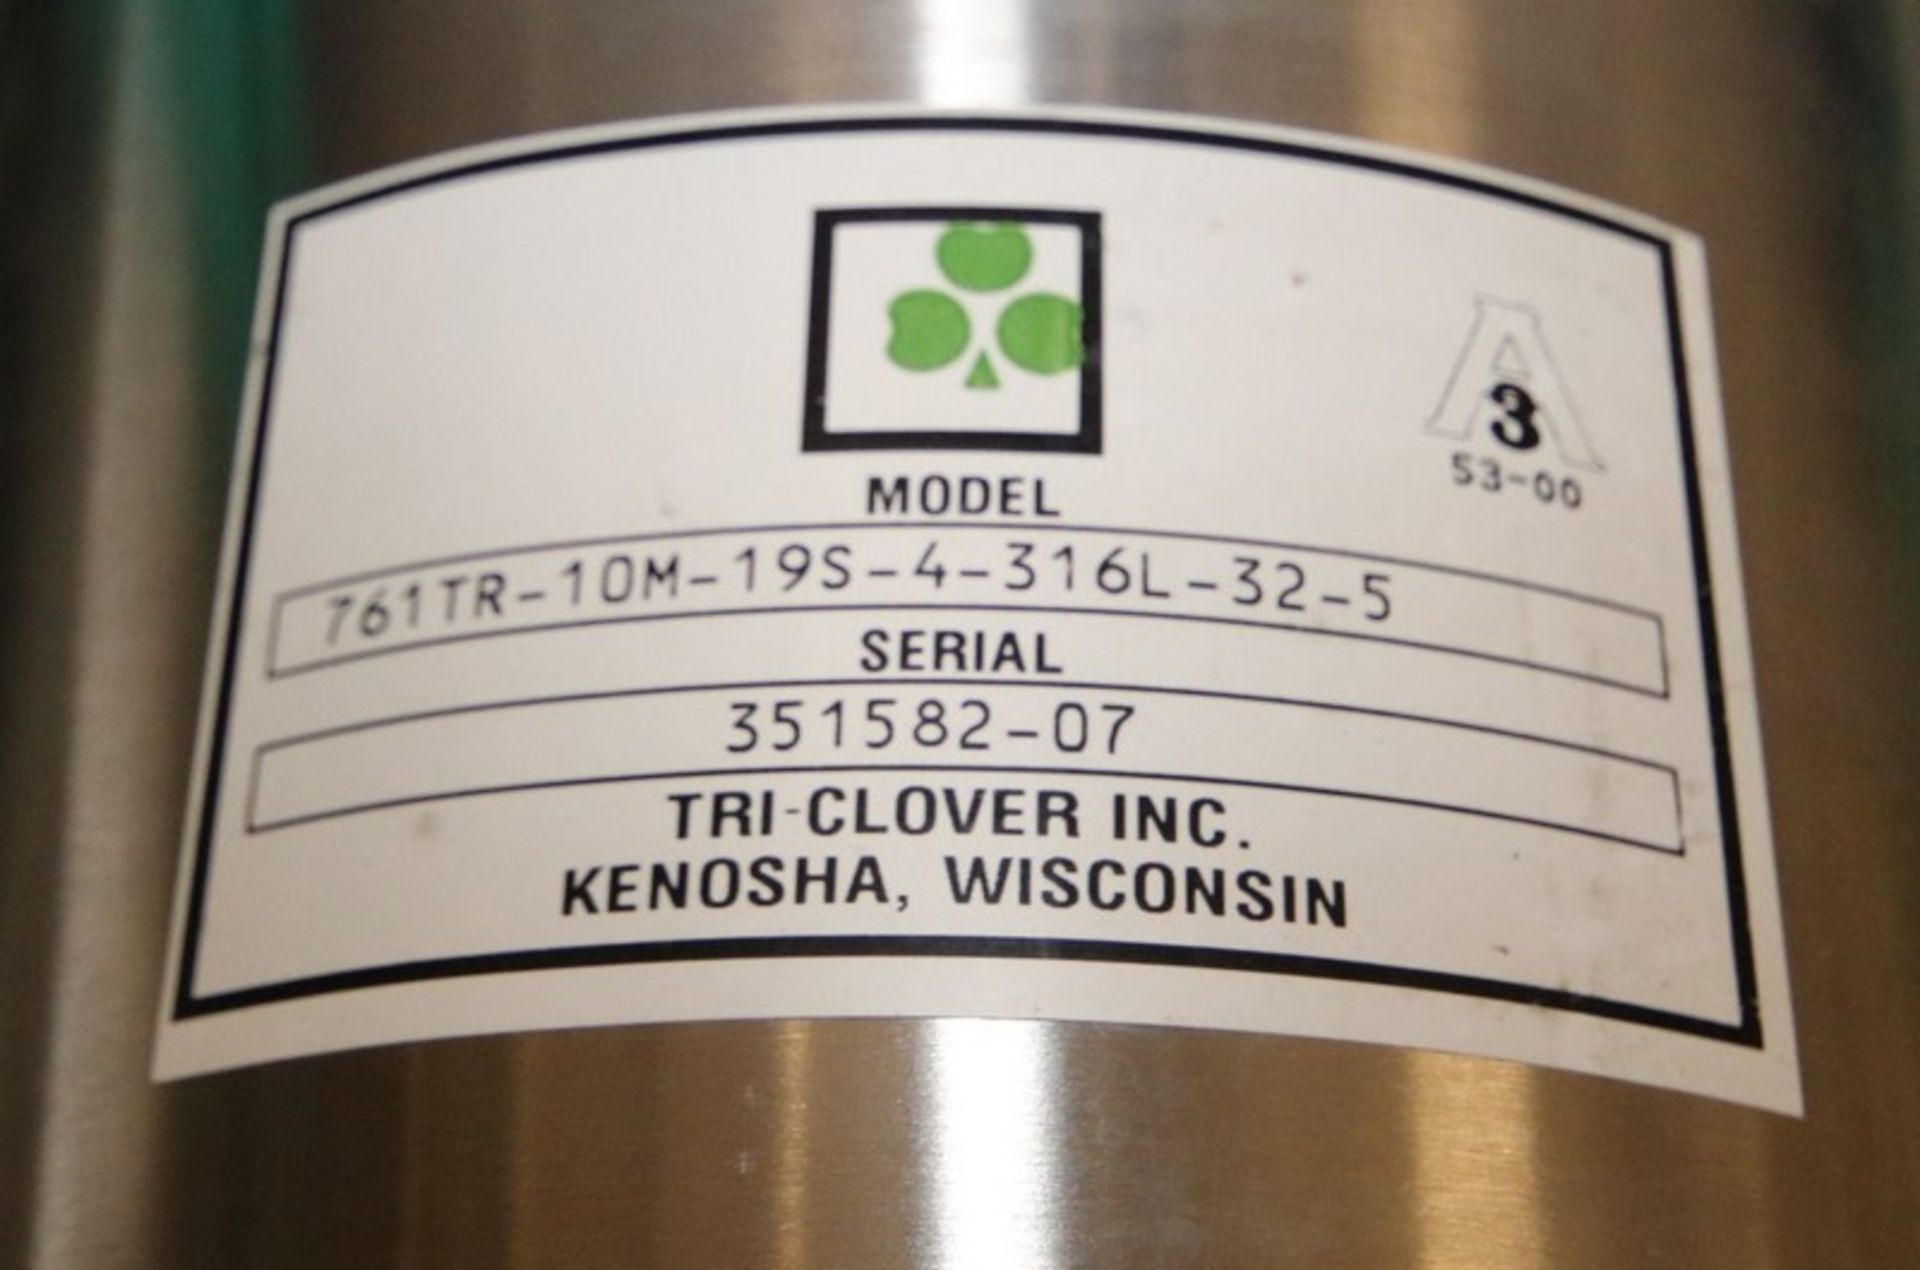 Lot of (4) Tri Clover 4" 2-Way S/S Air Valves, Model 761TR-10M-19S-4-316L-32-5, SN 35182-05, - Image 7 of 8